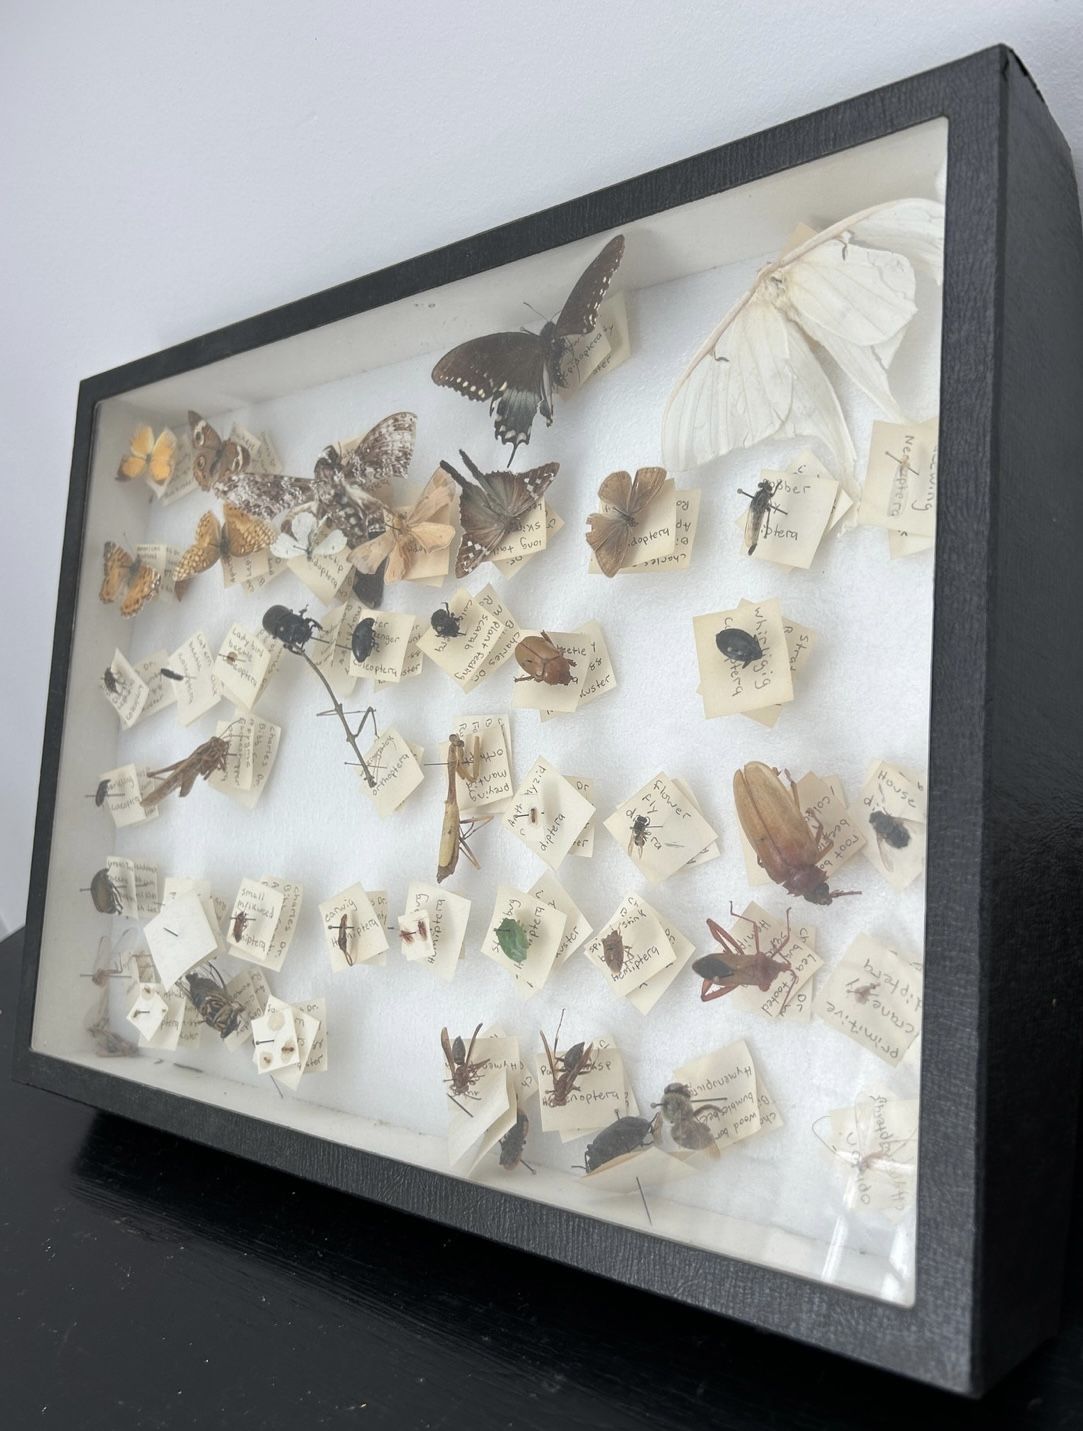  Insects In A Shadow Box-Super Cool Entomology Project 